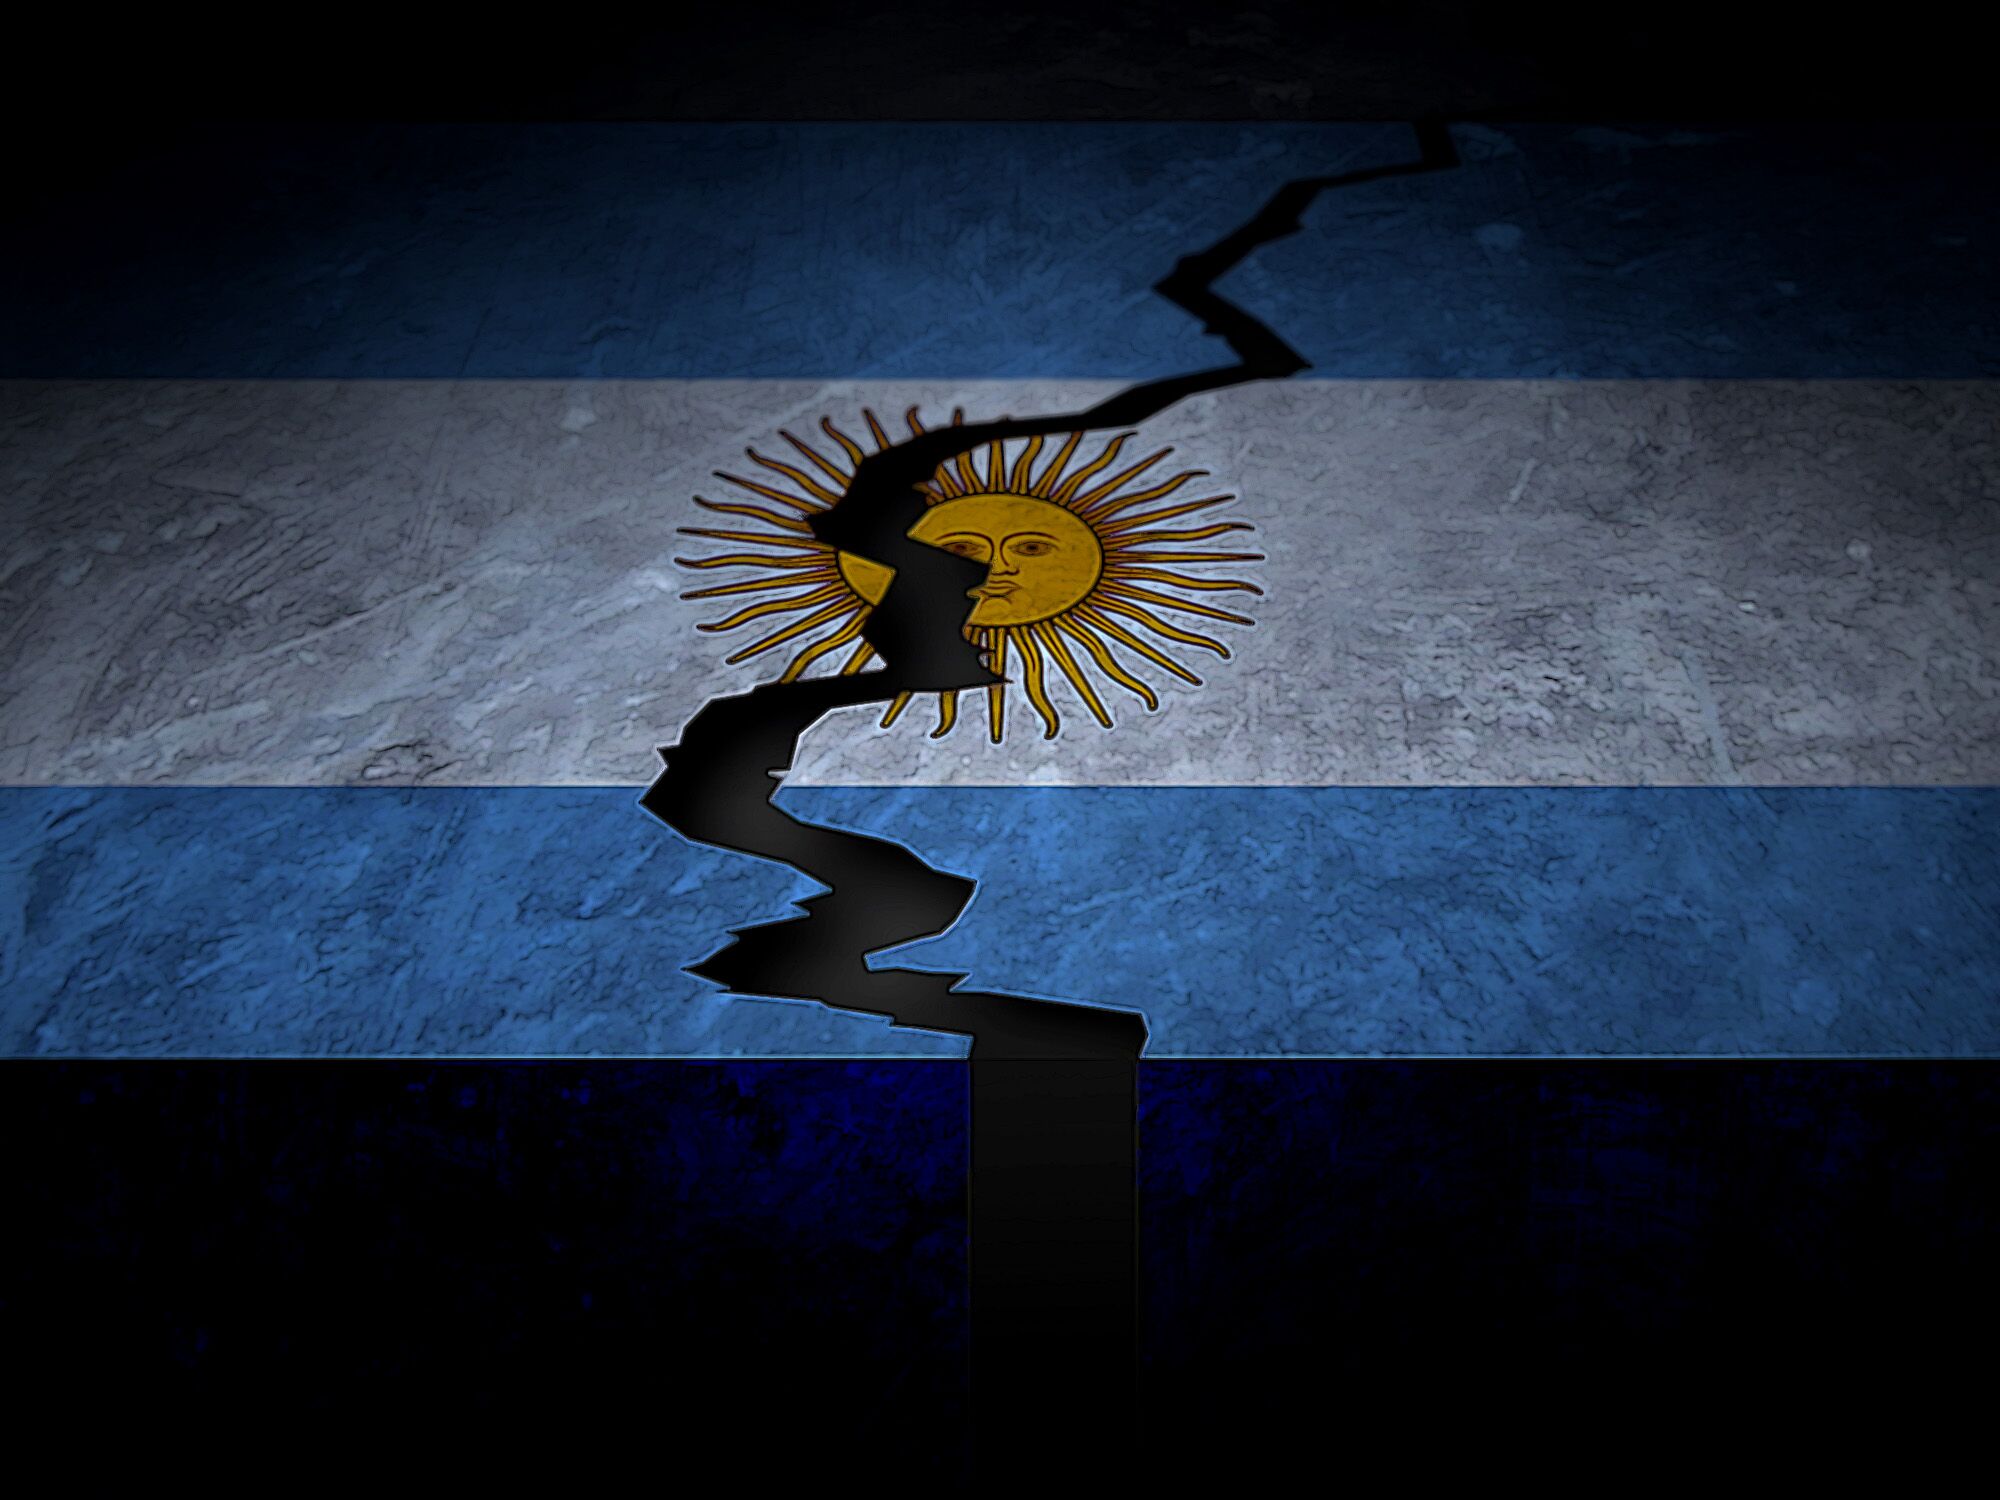 As for the banks, Argentina’s economy has yet to bottom out, which…